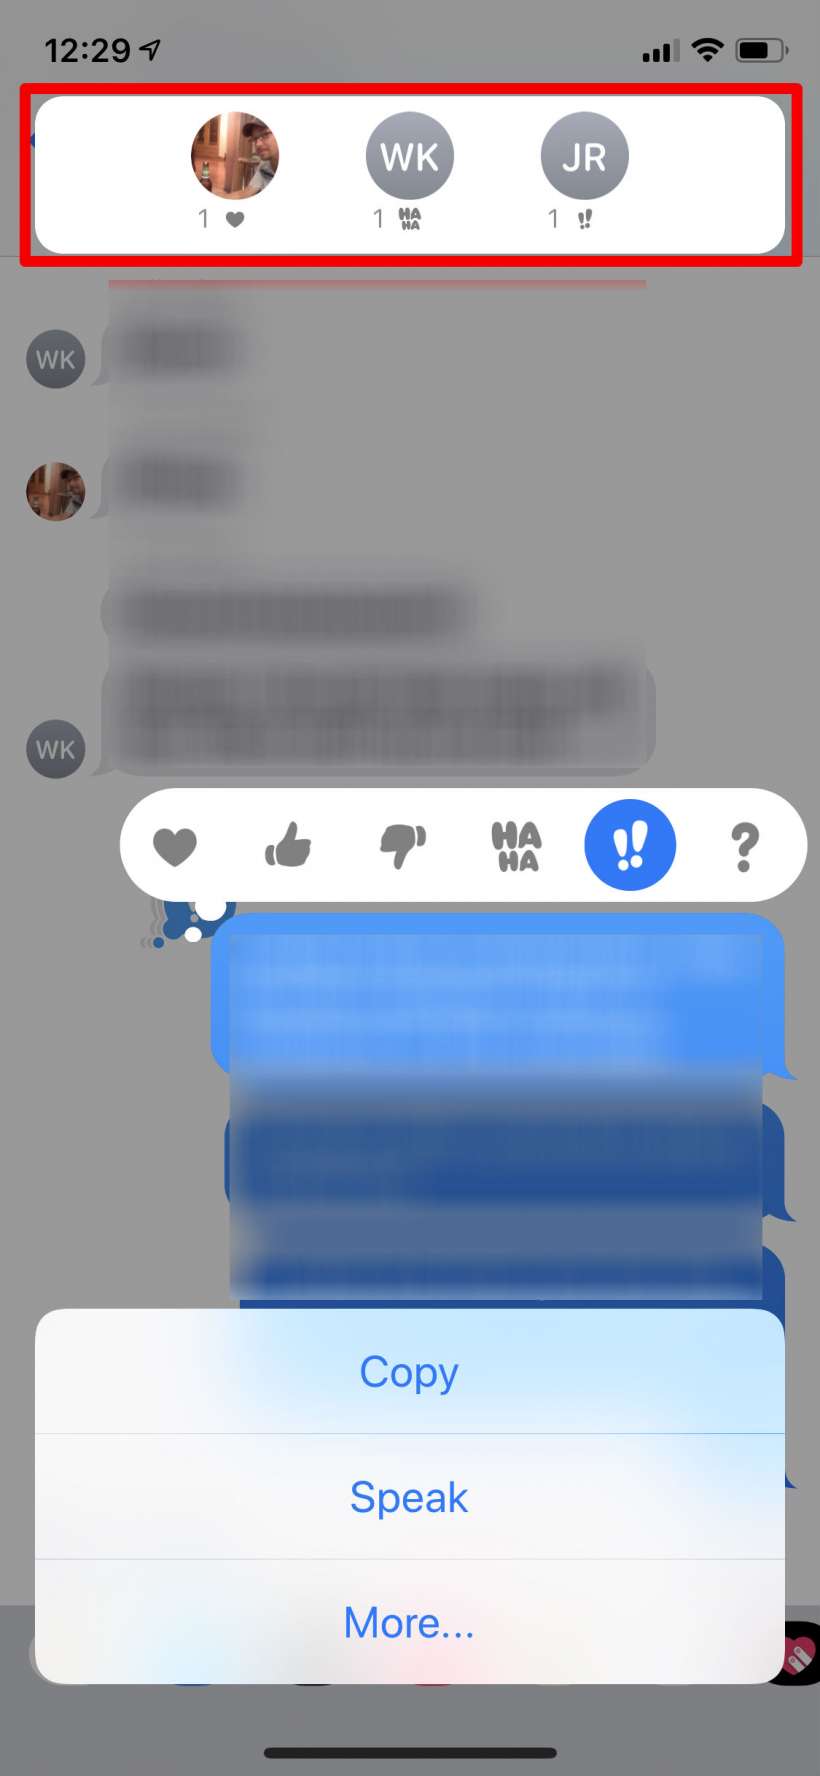 How to see who liked or disliked or gave a thumbs up or down on my Messages on iPhone.